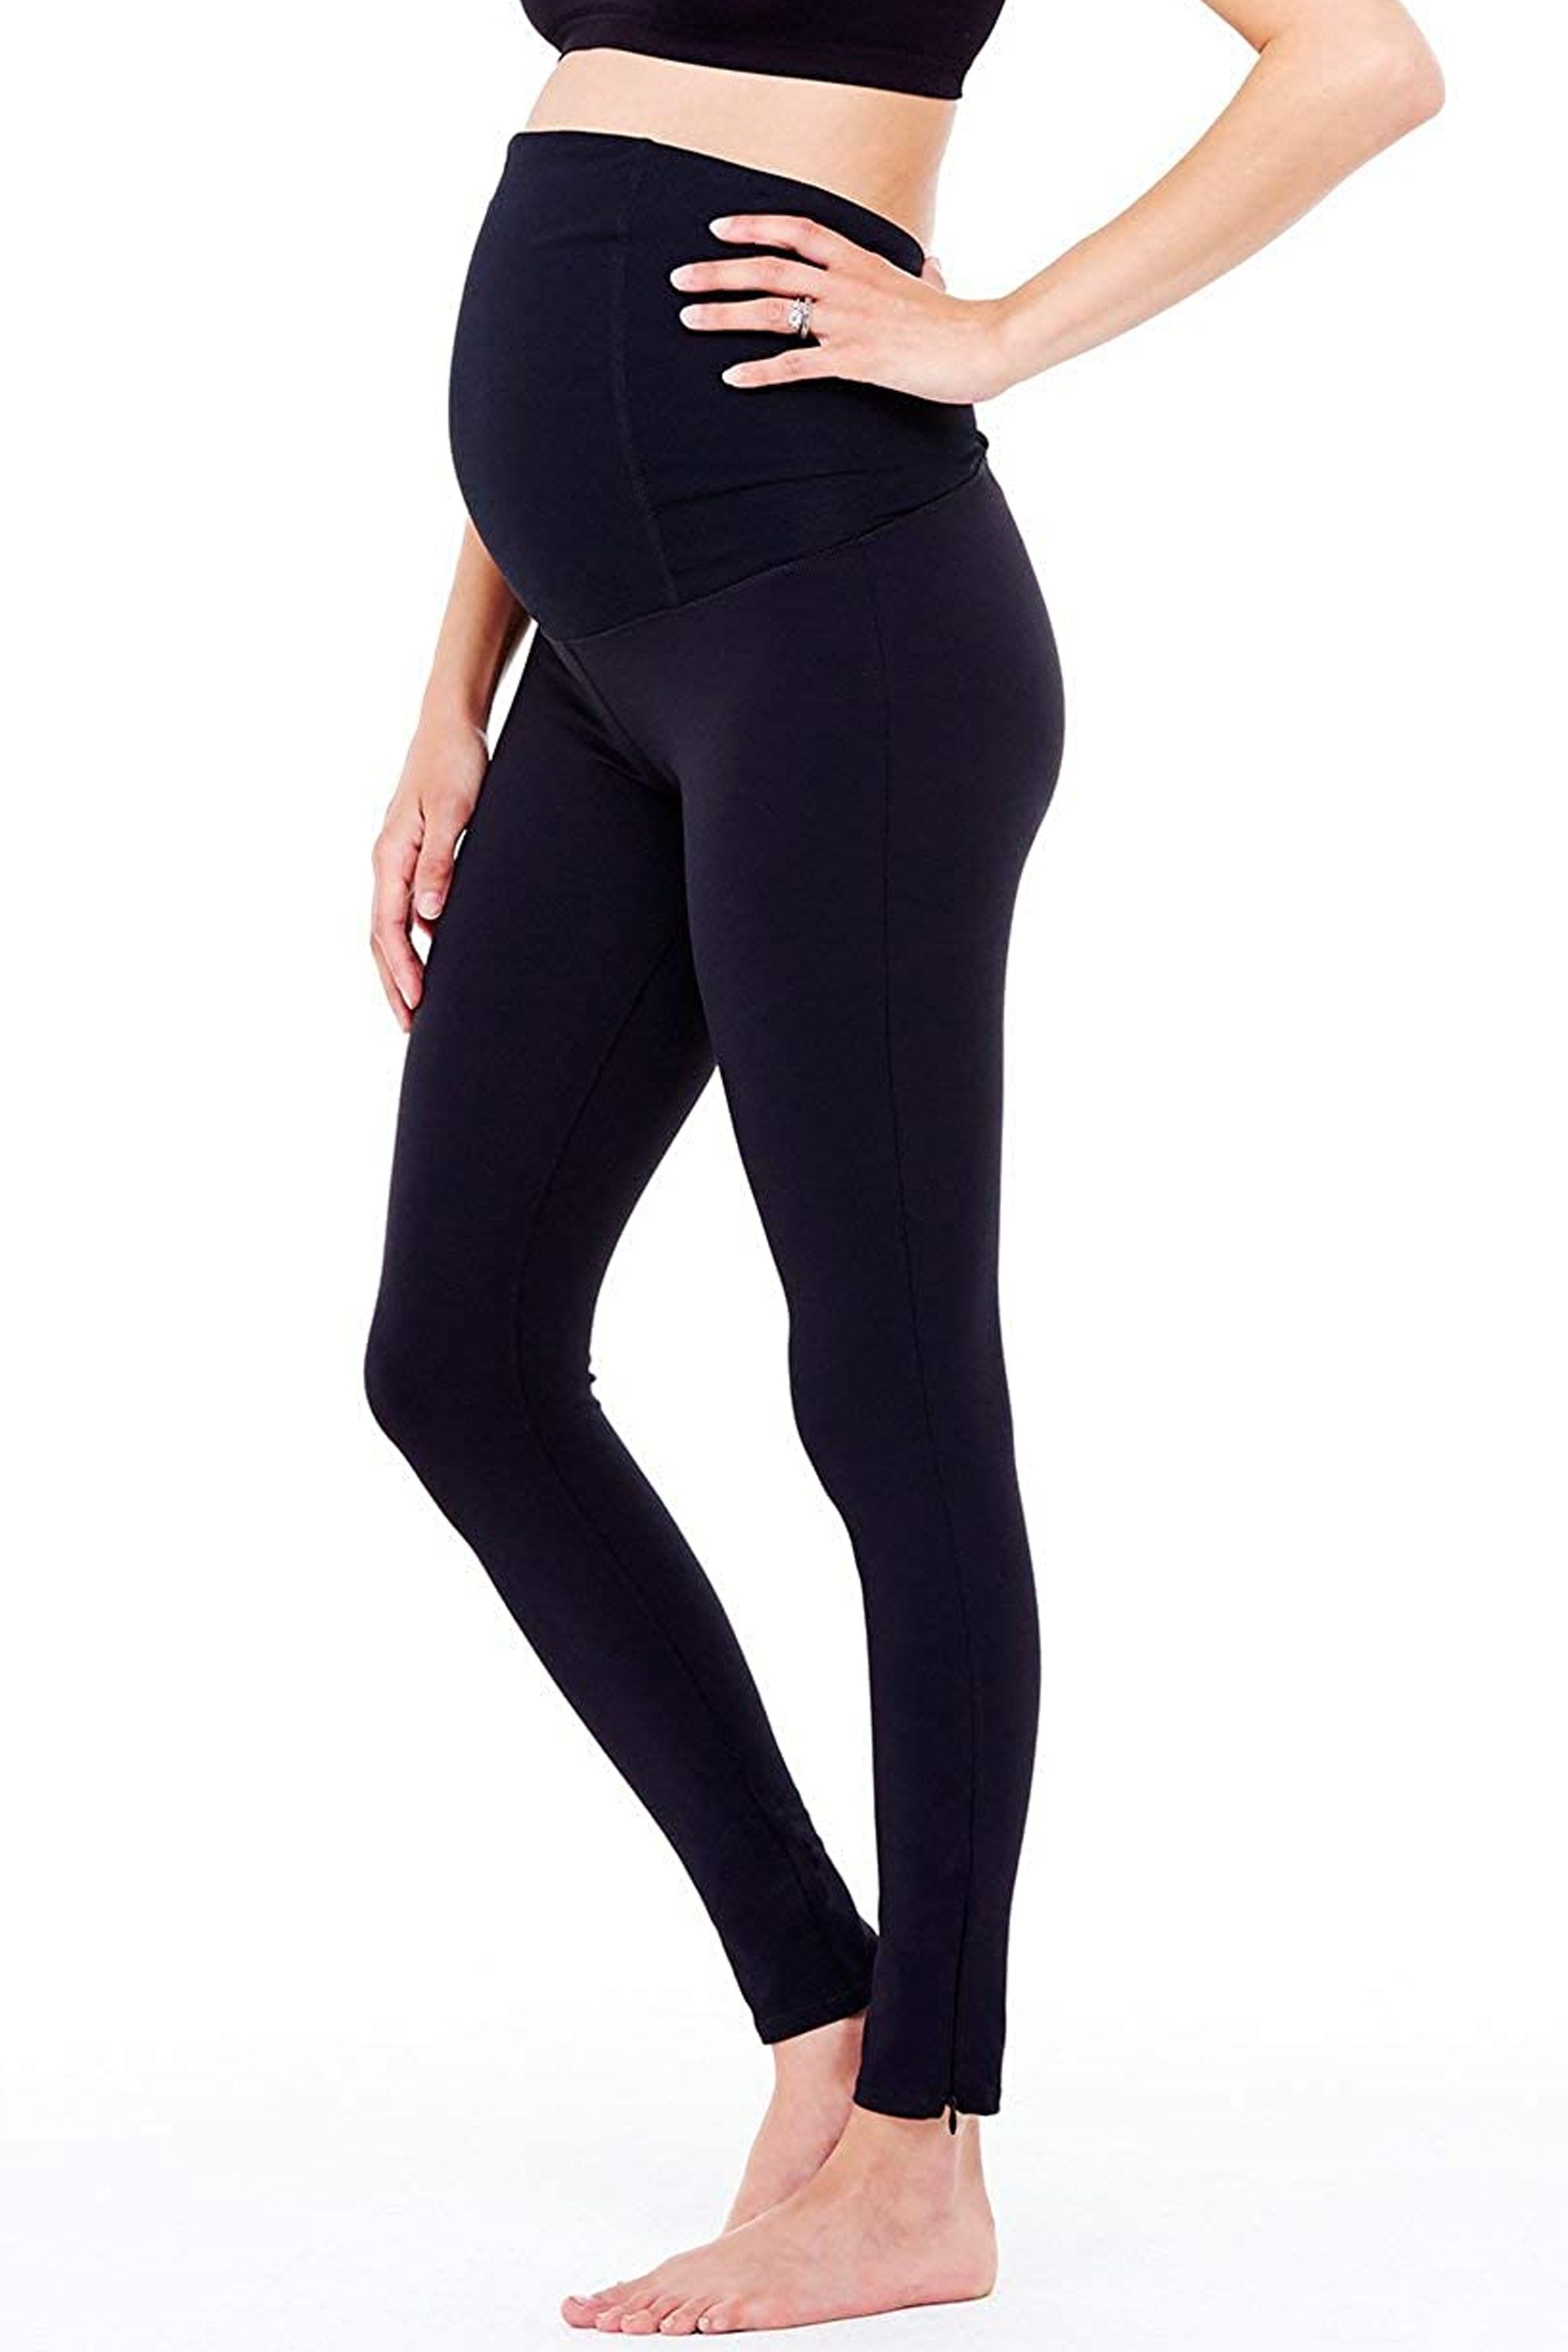 Joymom Maternity Leggings Over The Belly Pregnancy Yoga Pants with Side Pockets